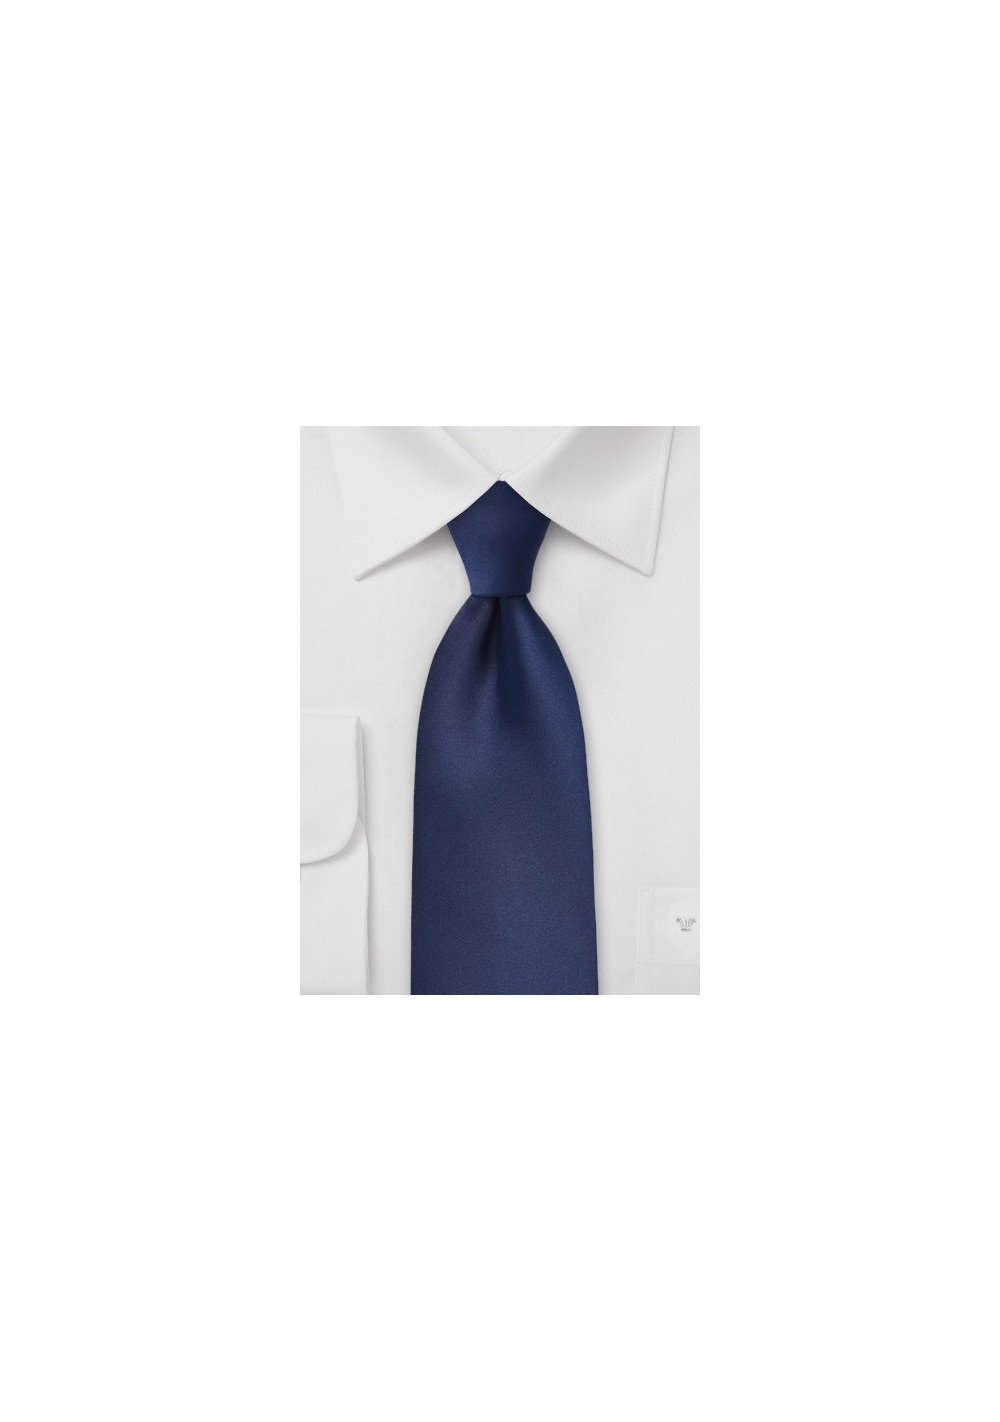 Pacific Blue Tie Made for Kids